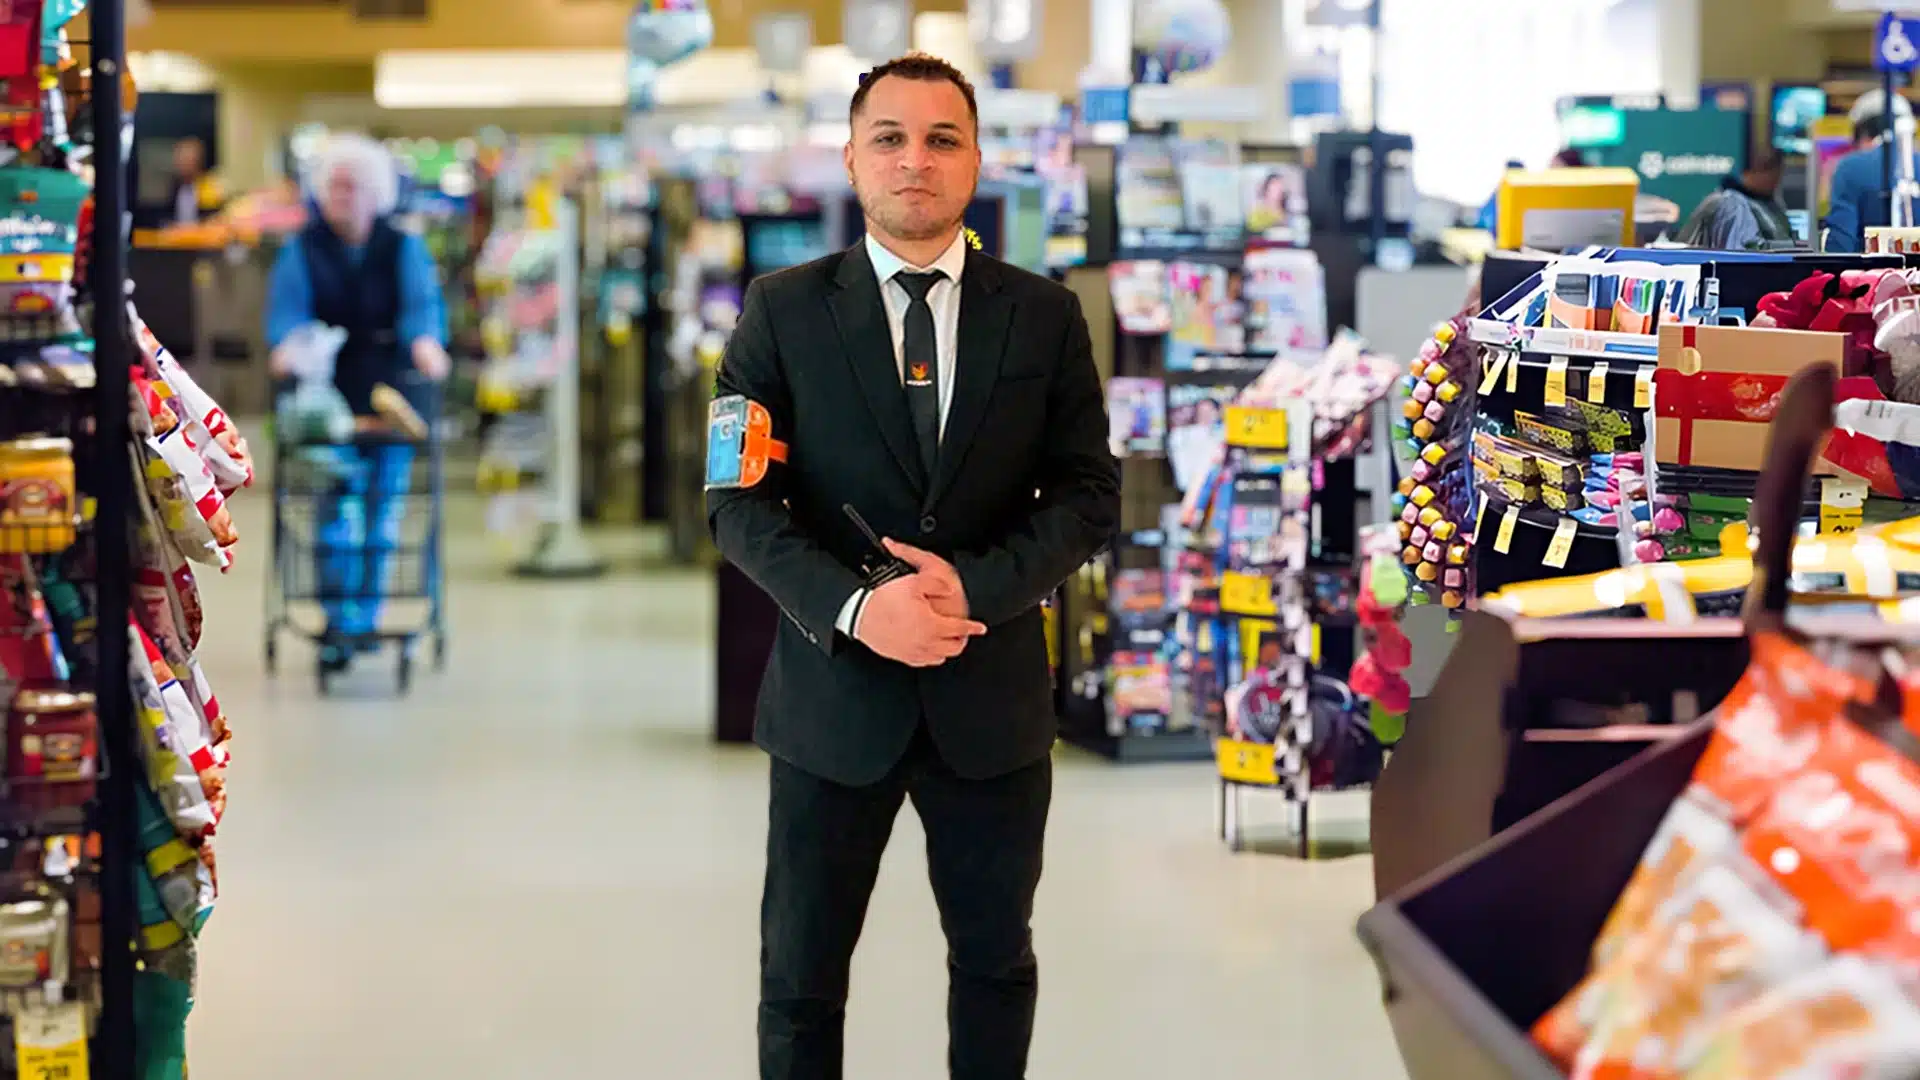 Retail security guard in Guard Mark uniform dealing with challenging situations, provides best retail security services.